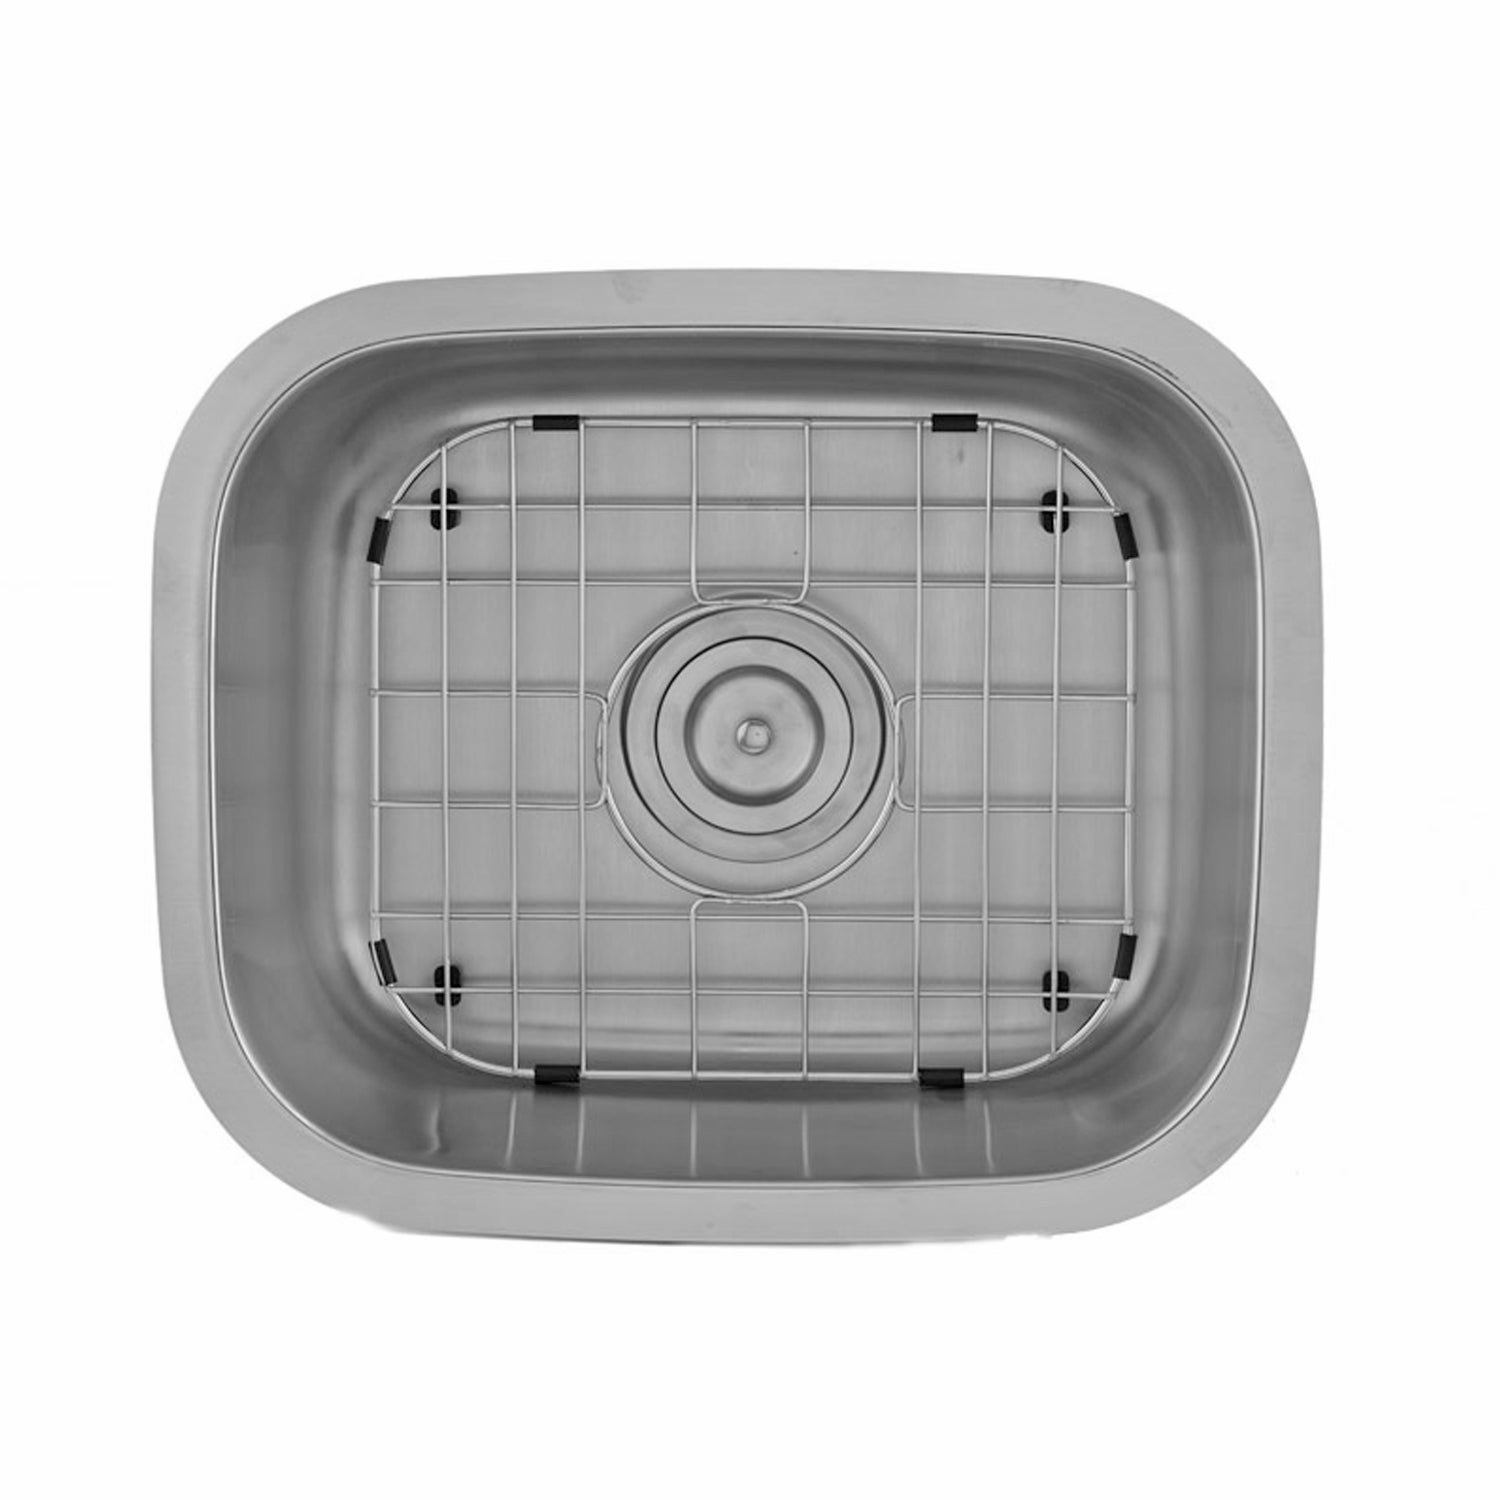 DAX Grid for Kitchen Sink, Stainless Steel Body, Chrome Finish, Compatible with DAX-1815, 15-1/2 x 12-1/4 Inches (GRID-1815)